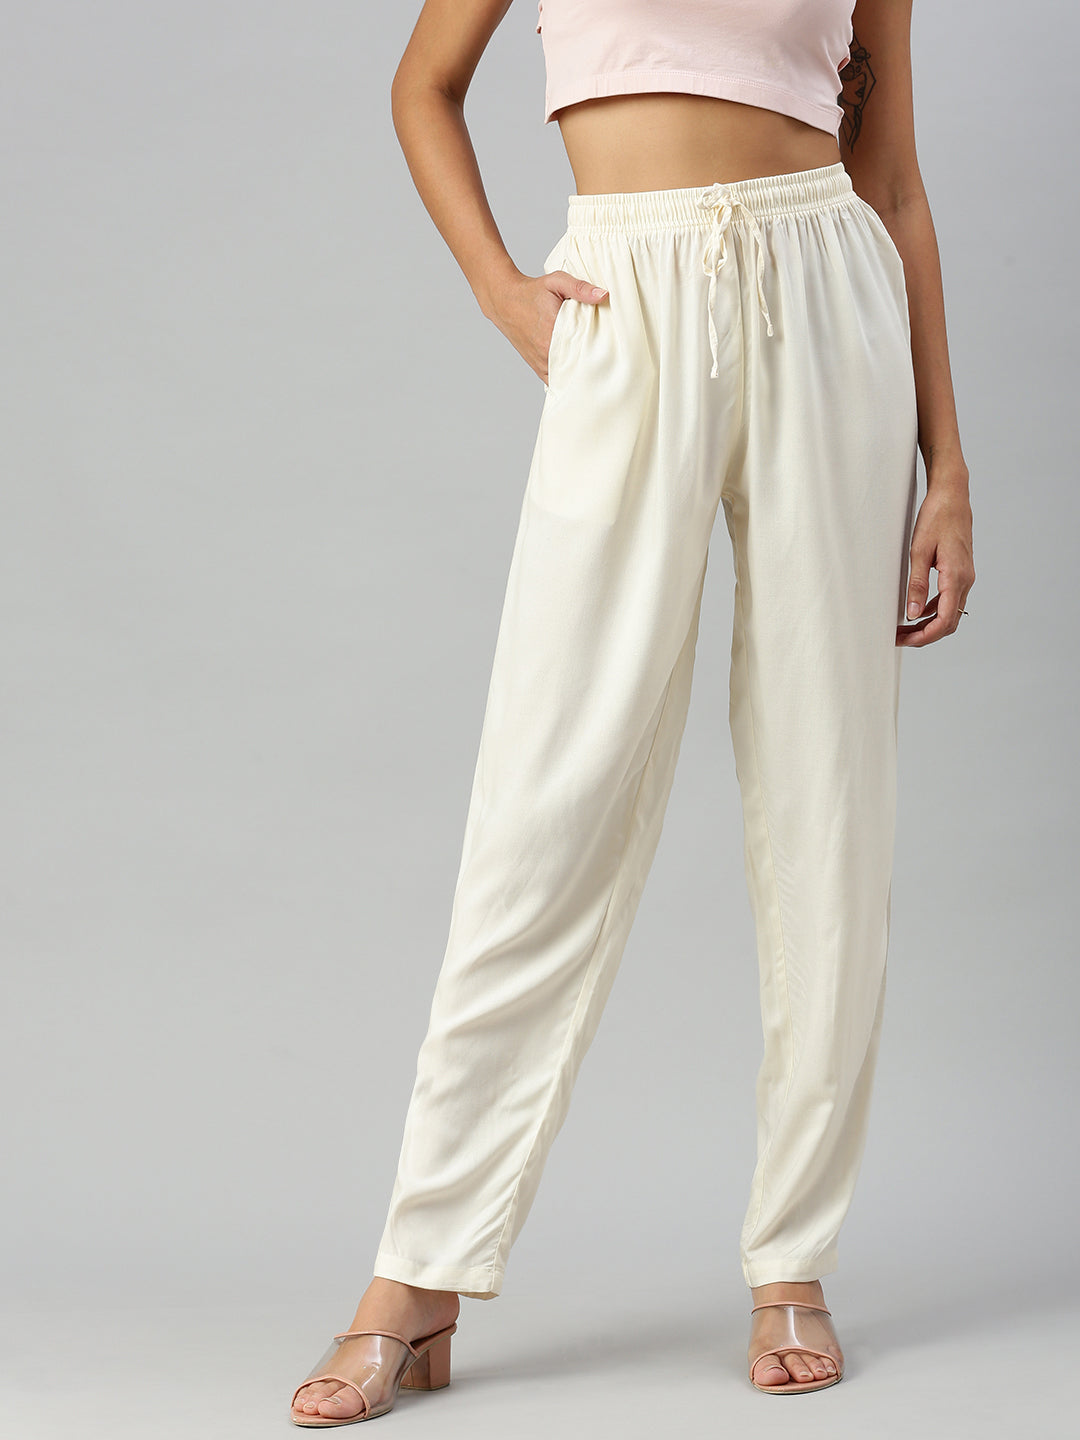 Stylish and Comfortable Women's Casual Pants